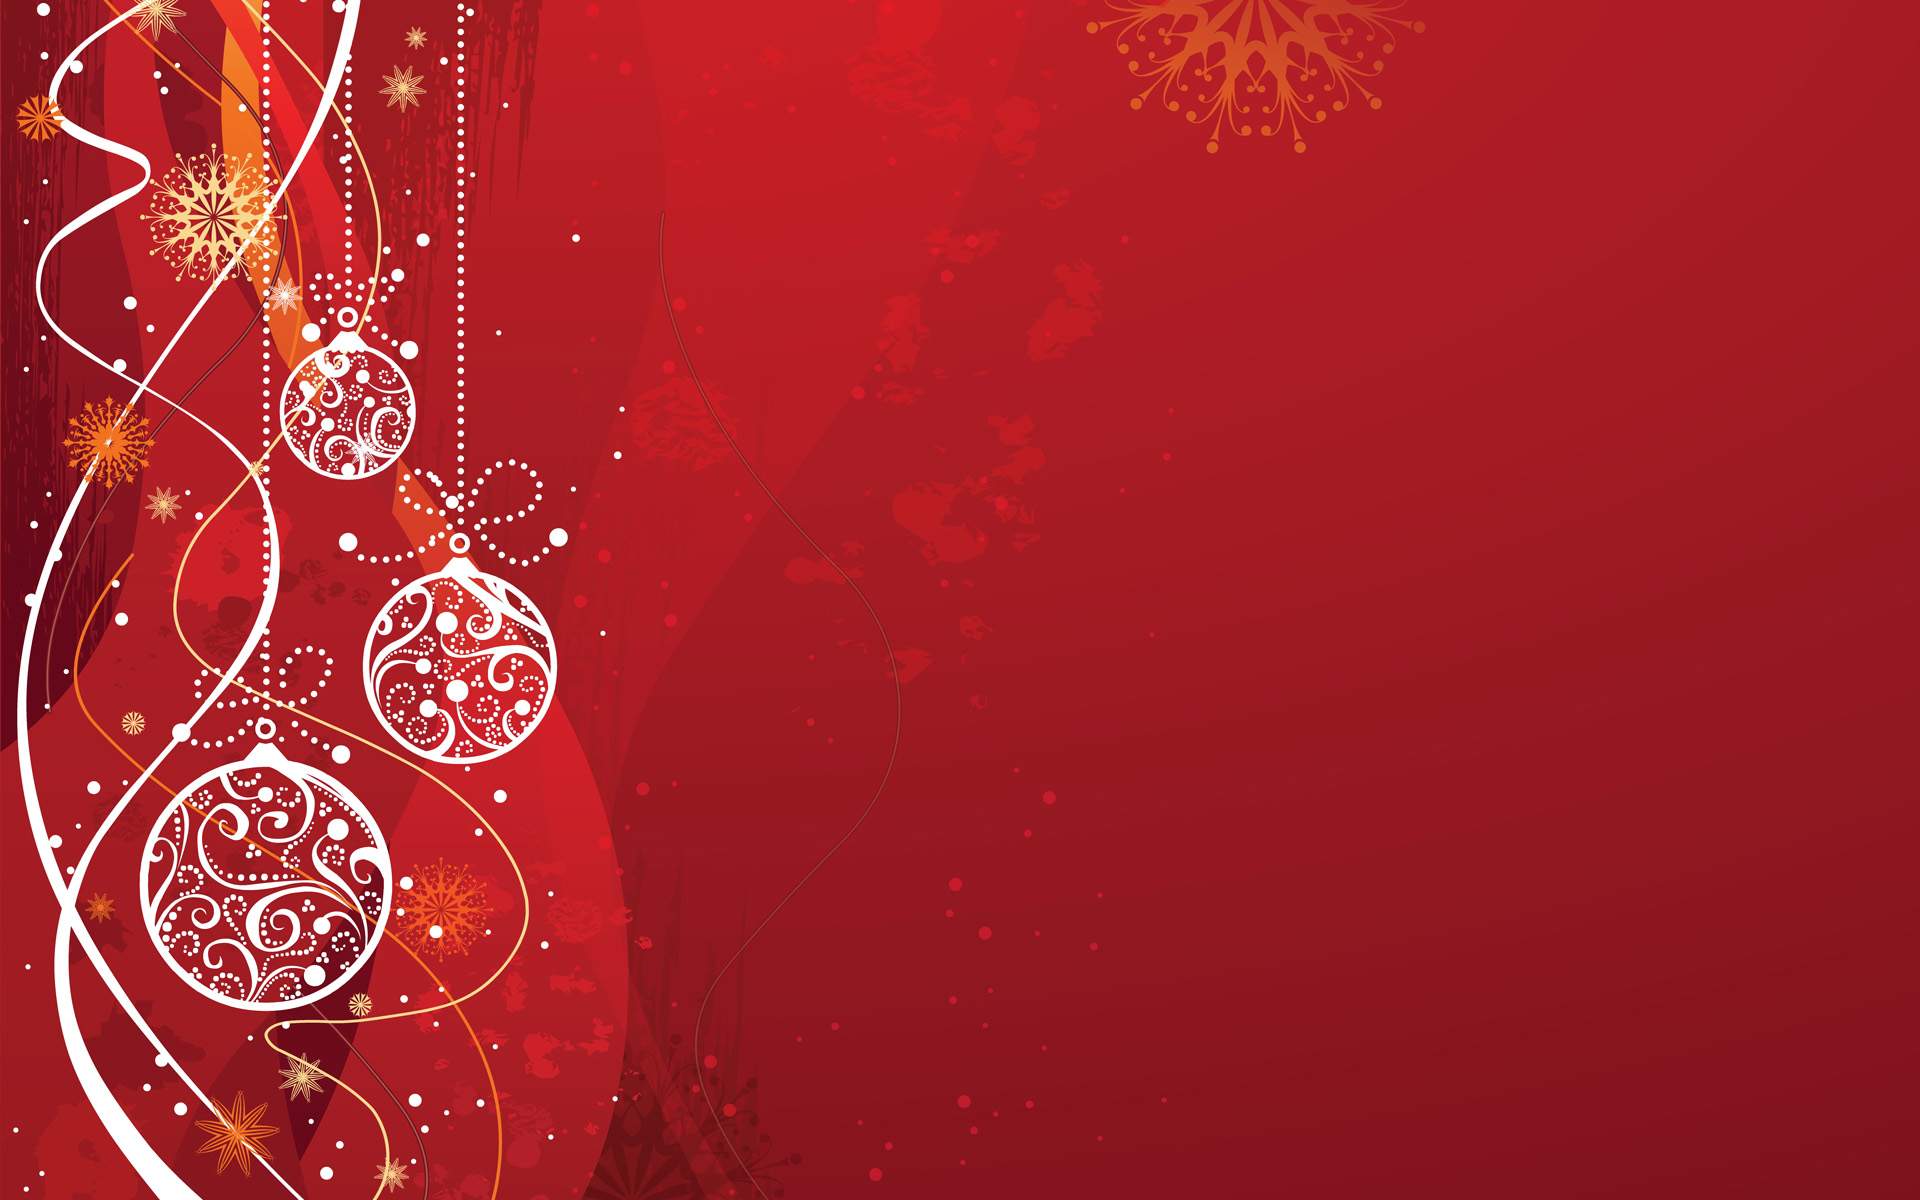 Free Christmas Wallpaper 7 Background